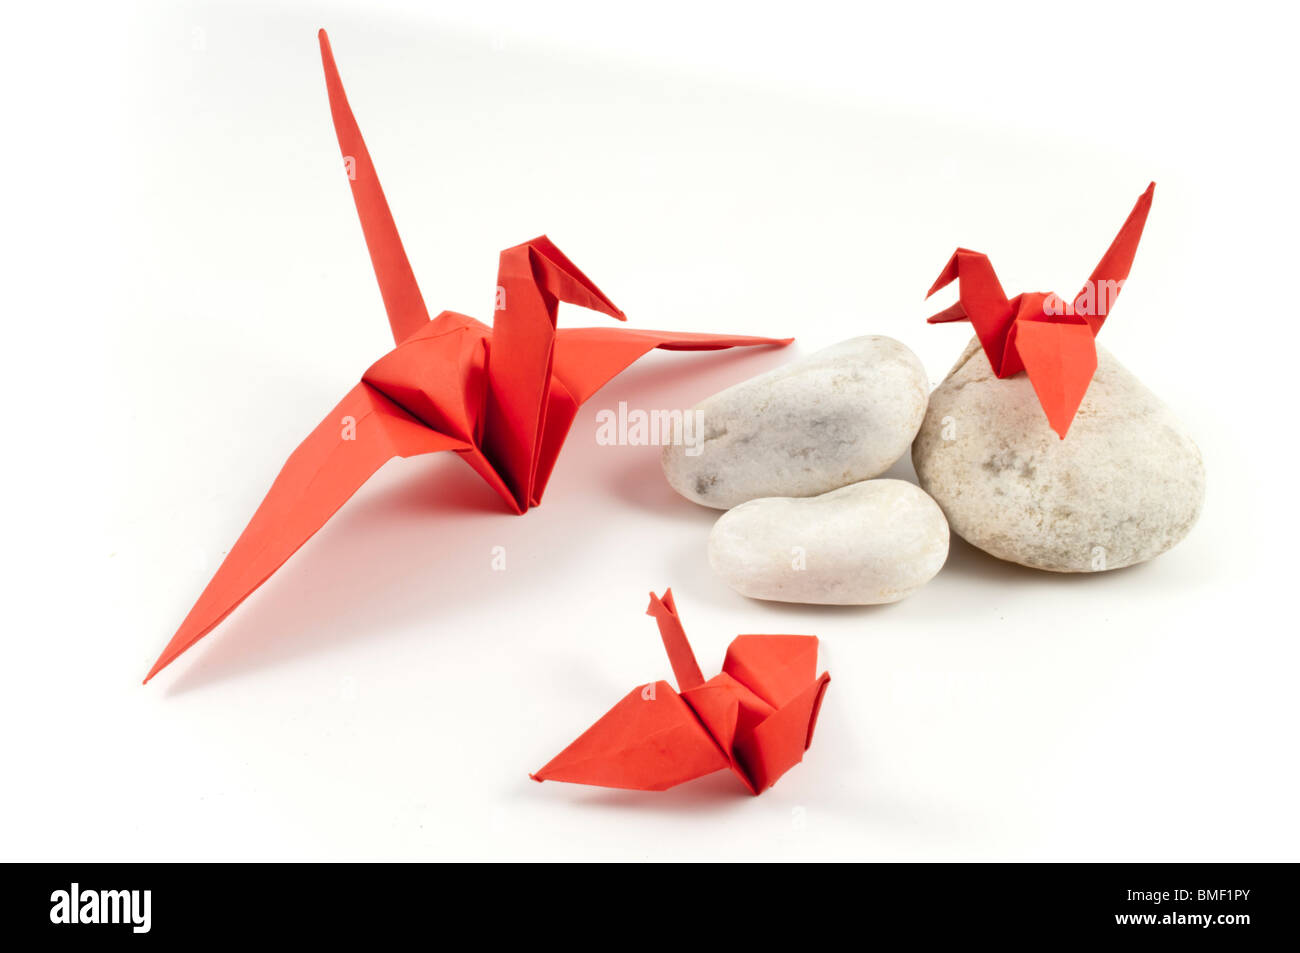 Red Origami Crane and his children on white stones Stock Photo